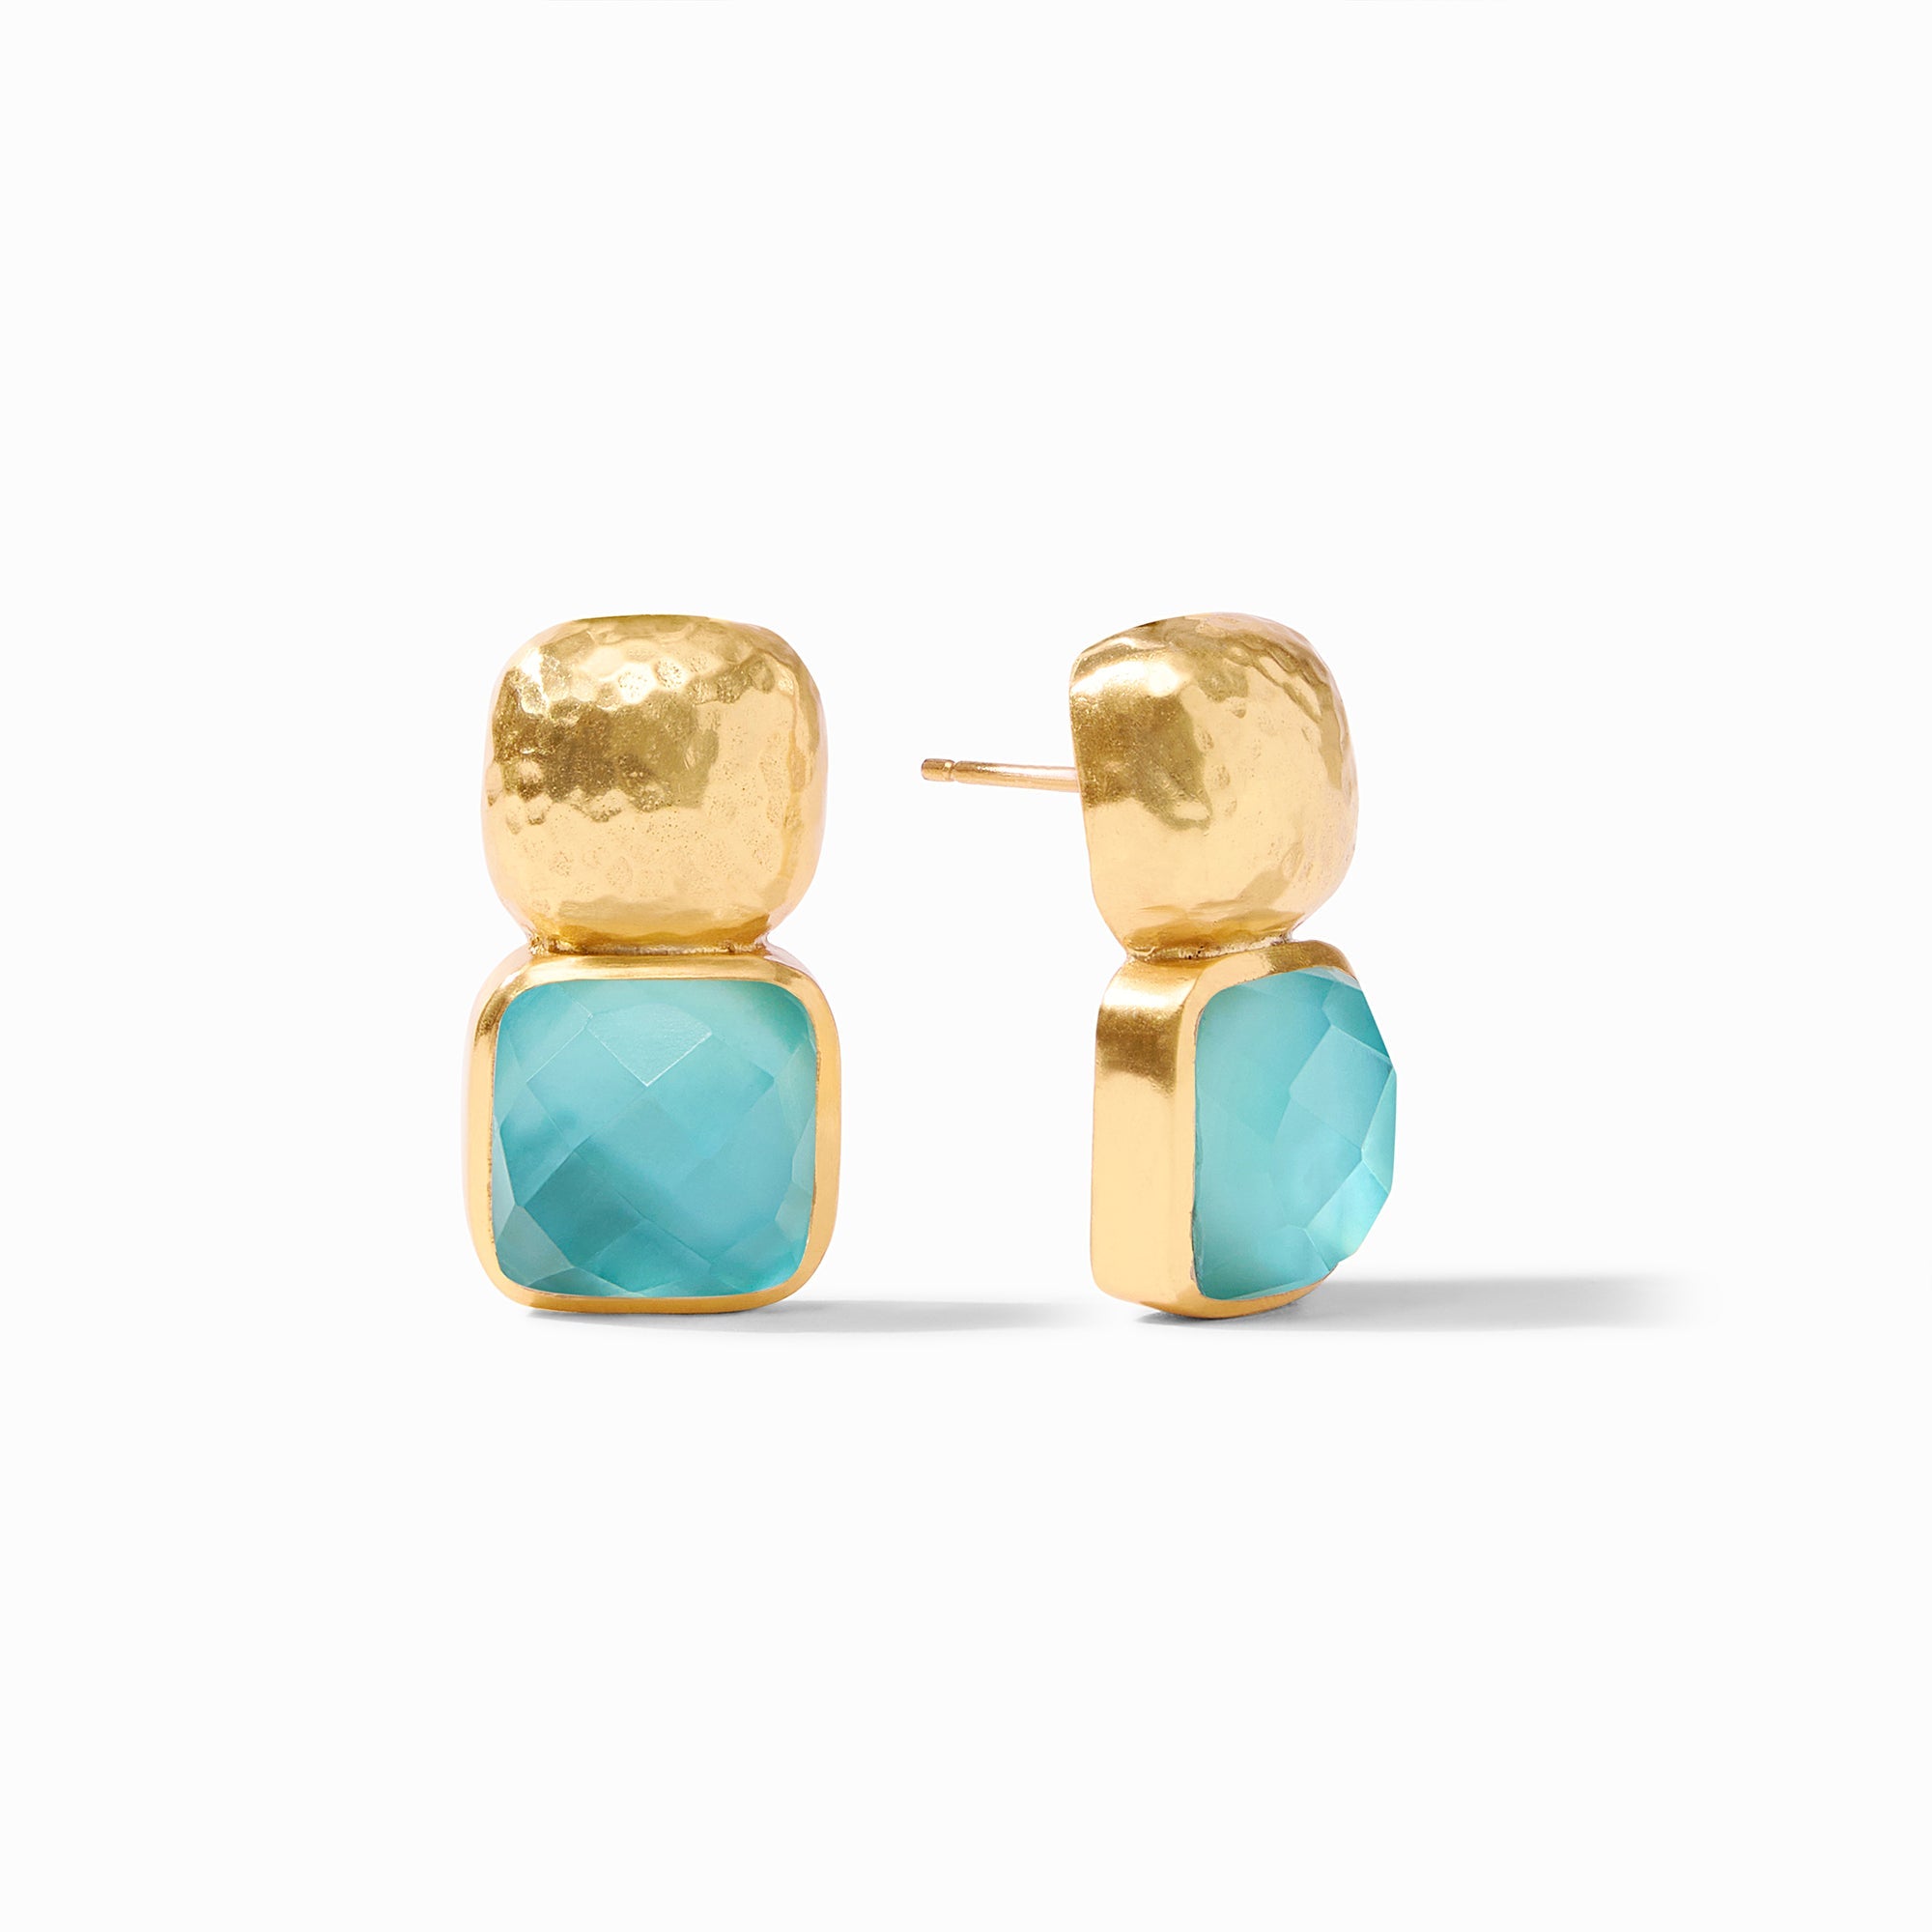 Catalina Earring - Julie Vos